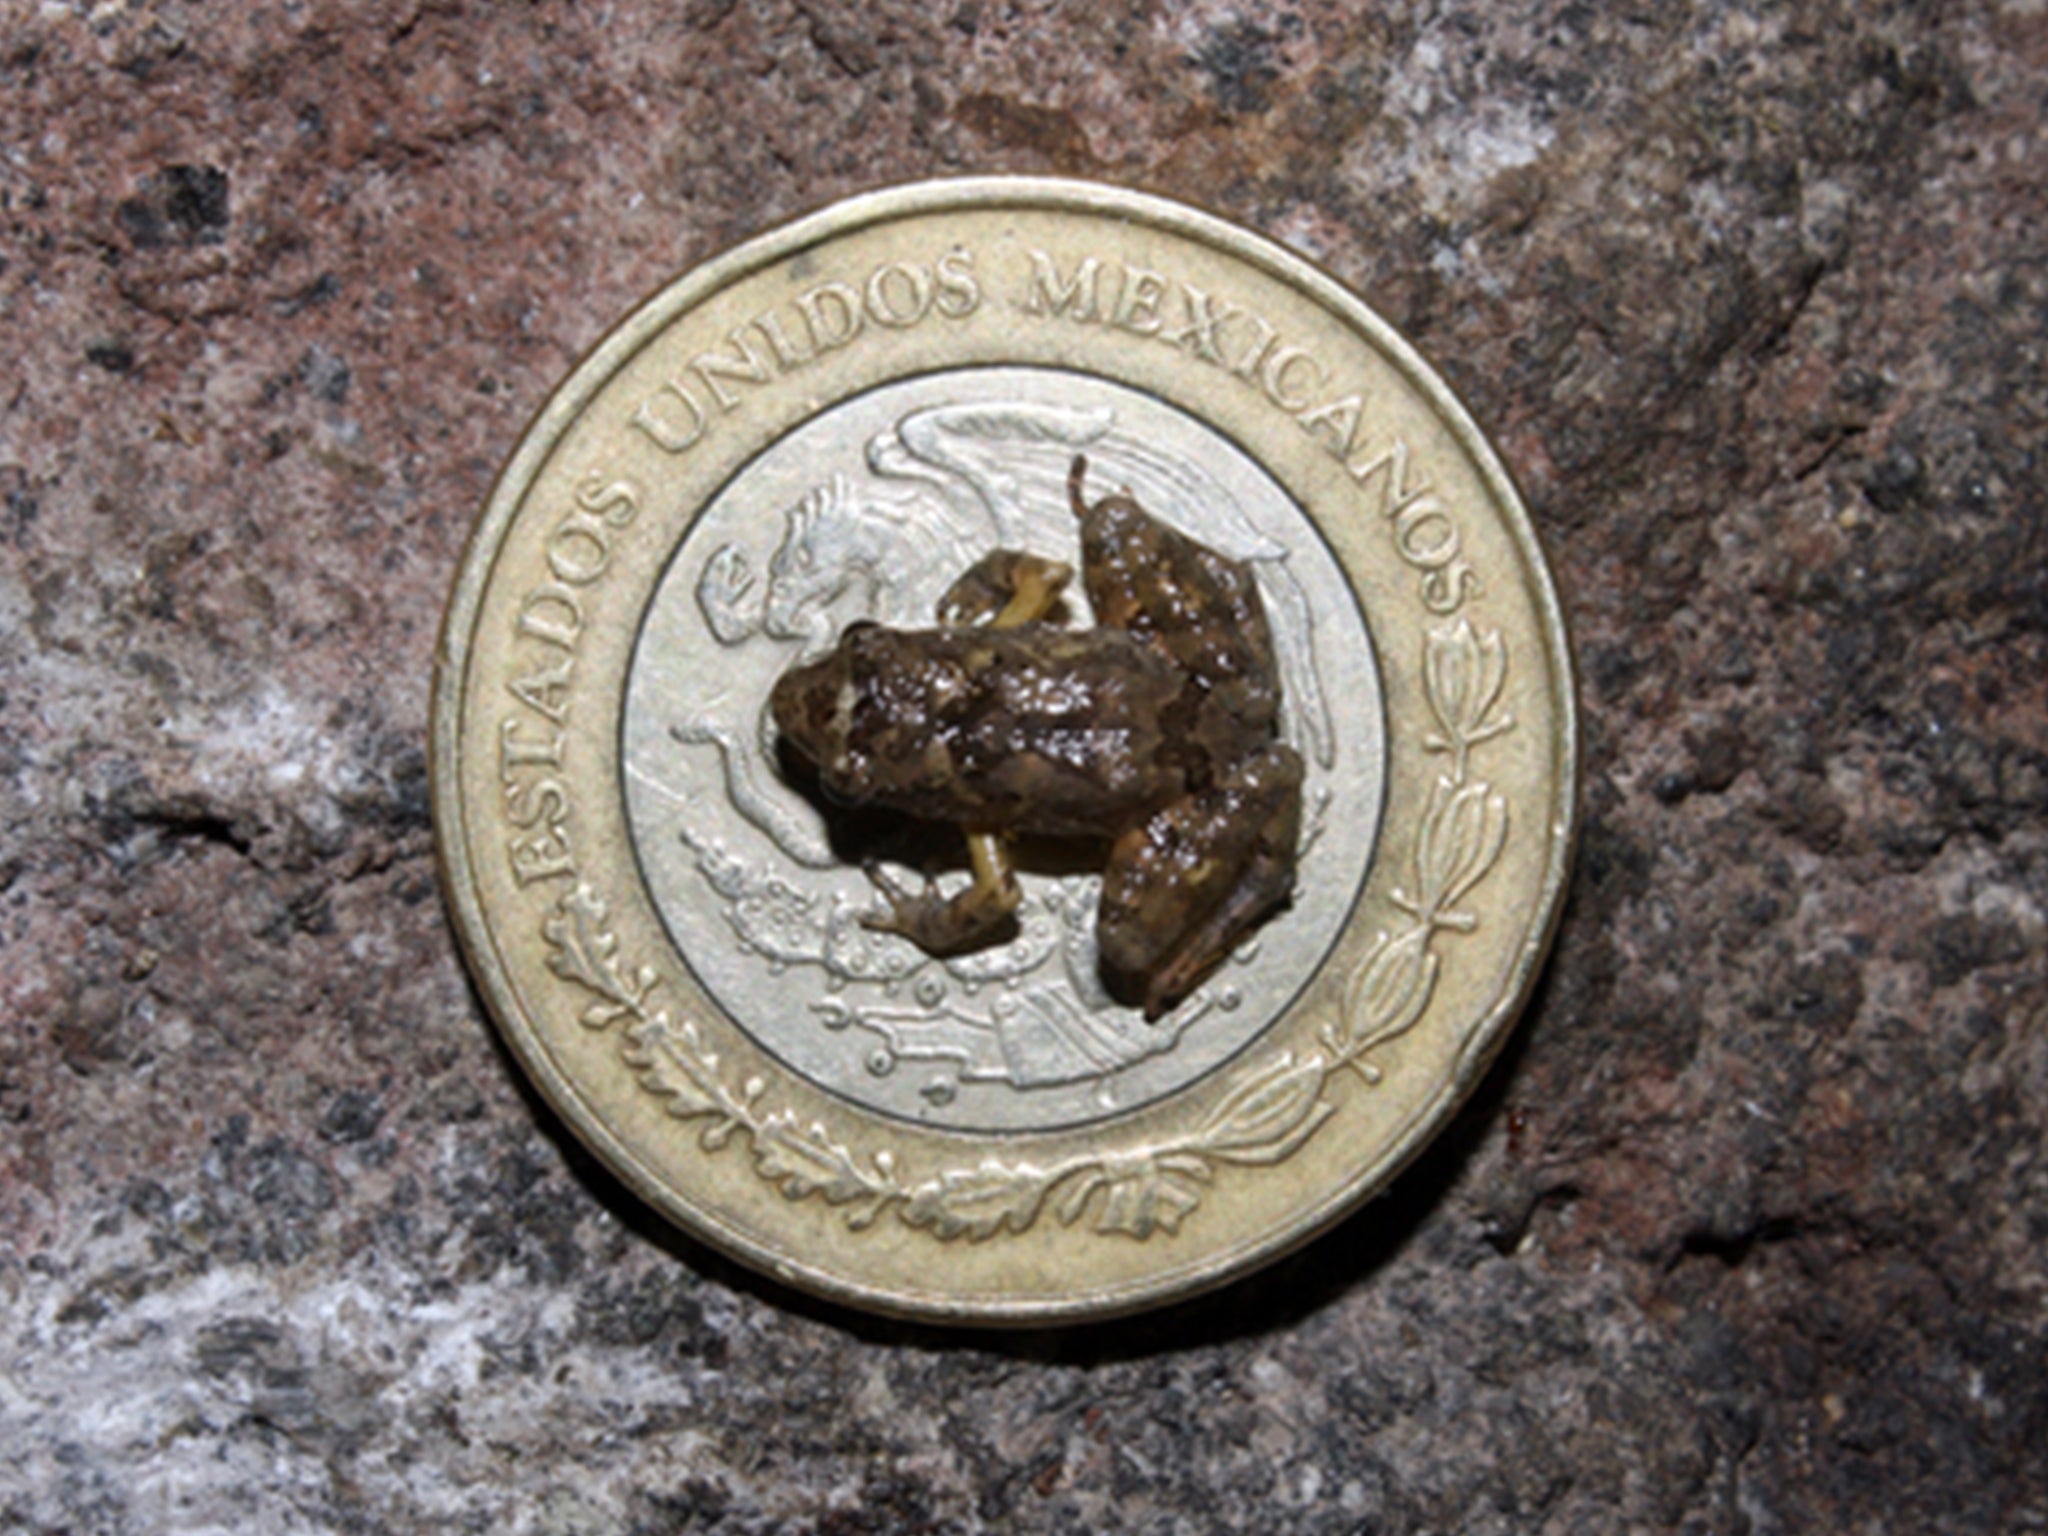 Newly-found frog seen here on 10 pesos coin of its native Mexico